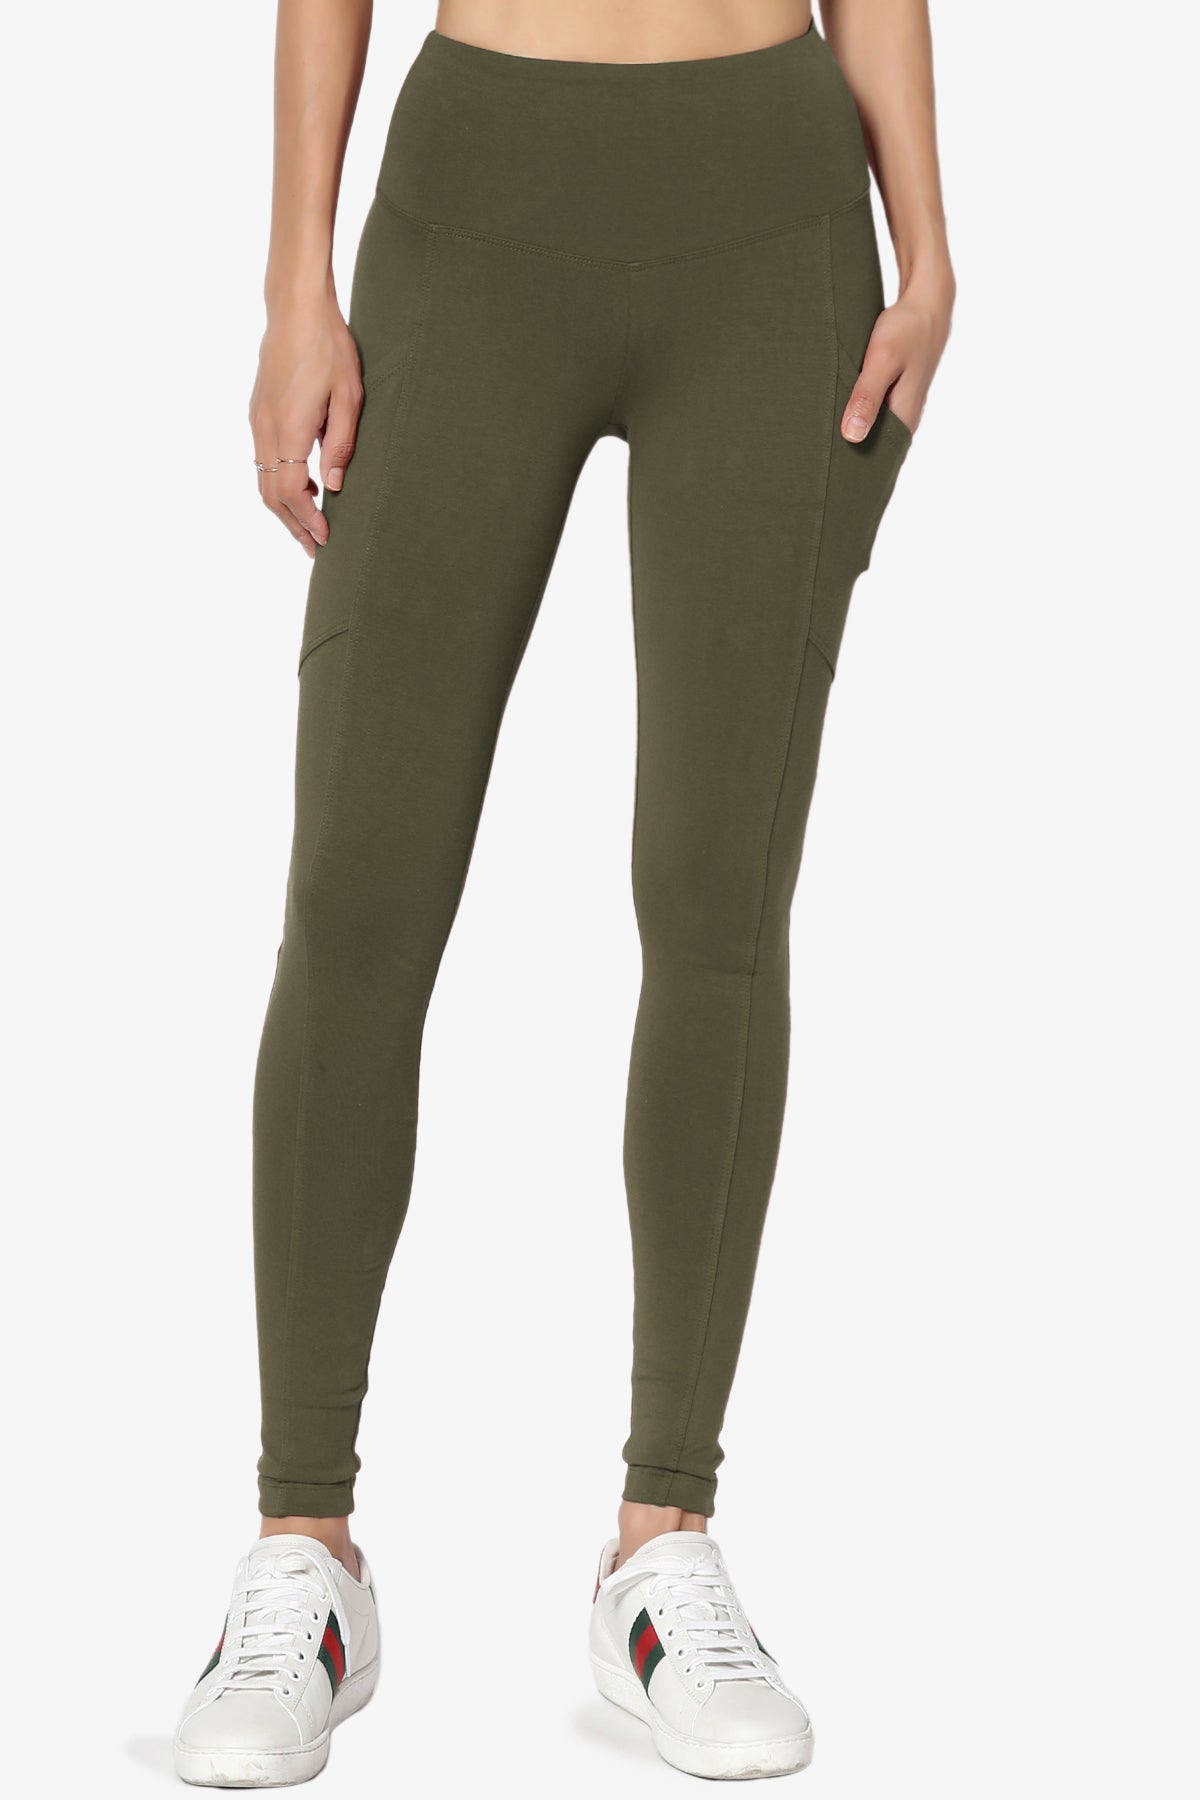 Ansley Luxe Cotton Leggings with Pockets OLIVE_3